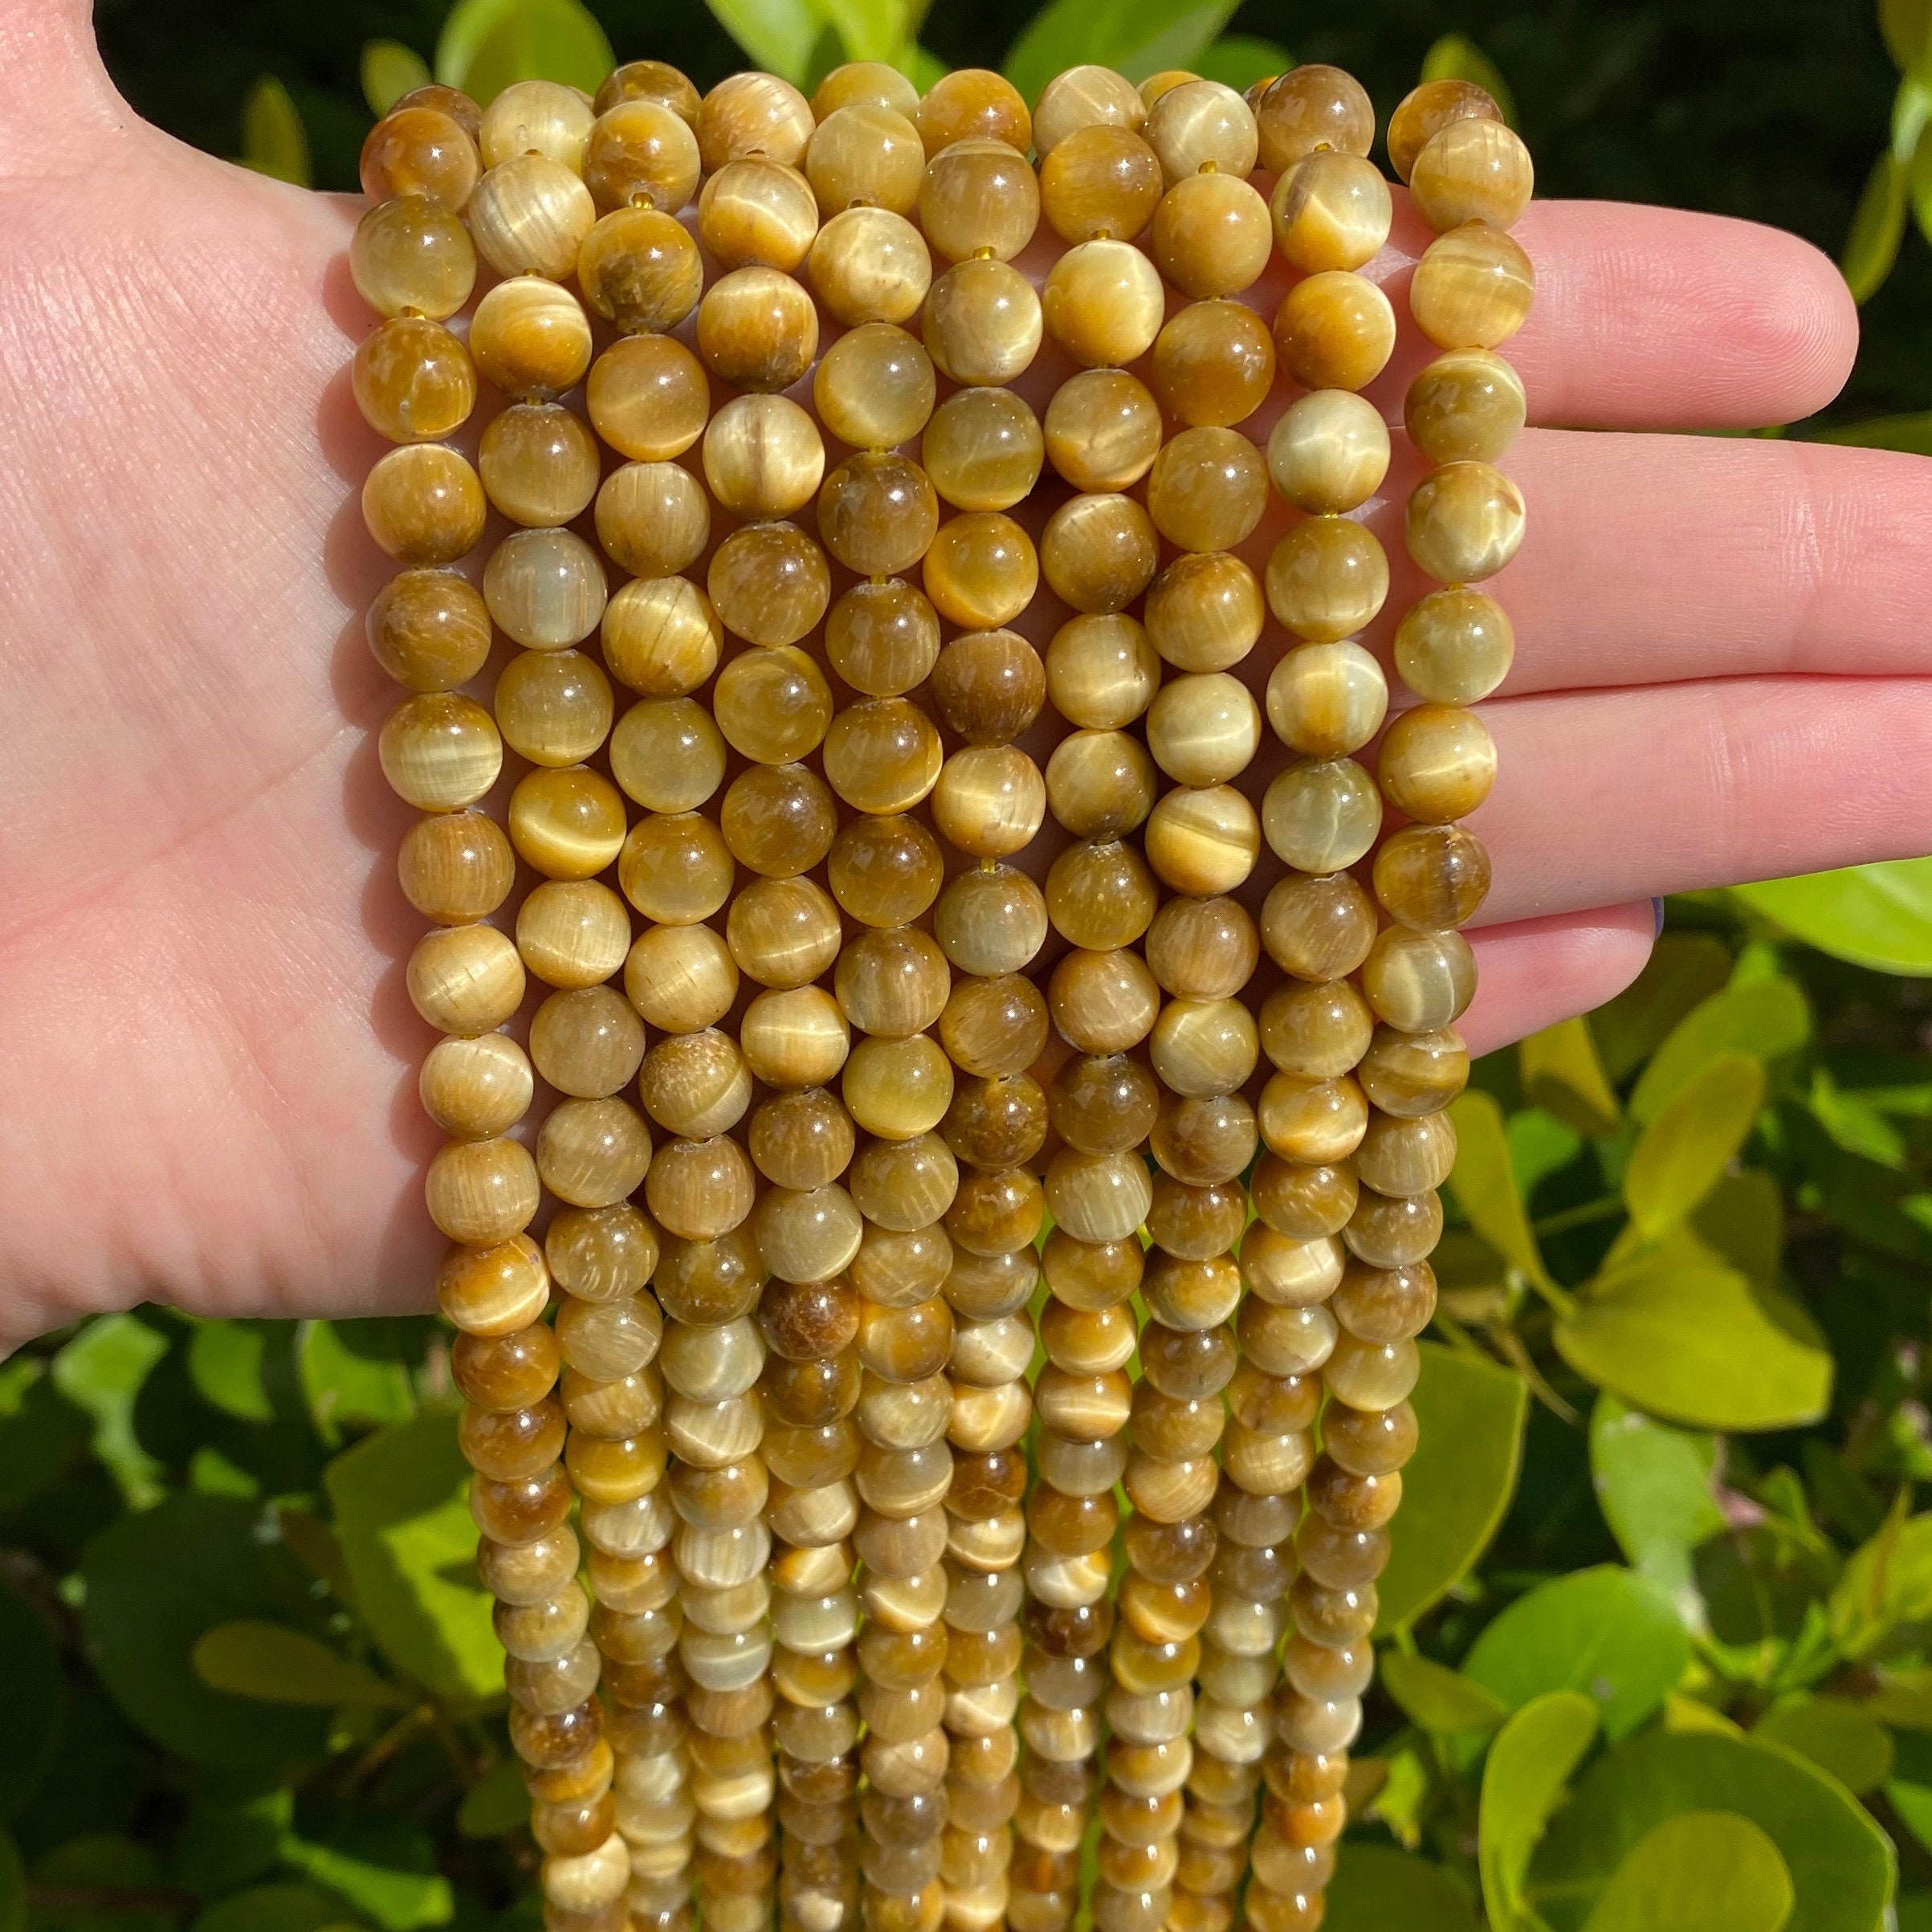 10mm Natural Yellow Tiger Eye Beads Round Gemstone Loose Beads for Jewelry Making (38-40pcs/strand)